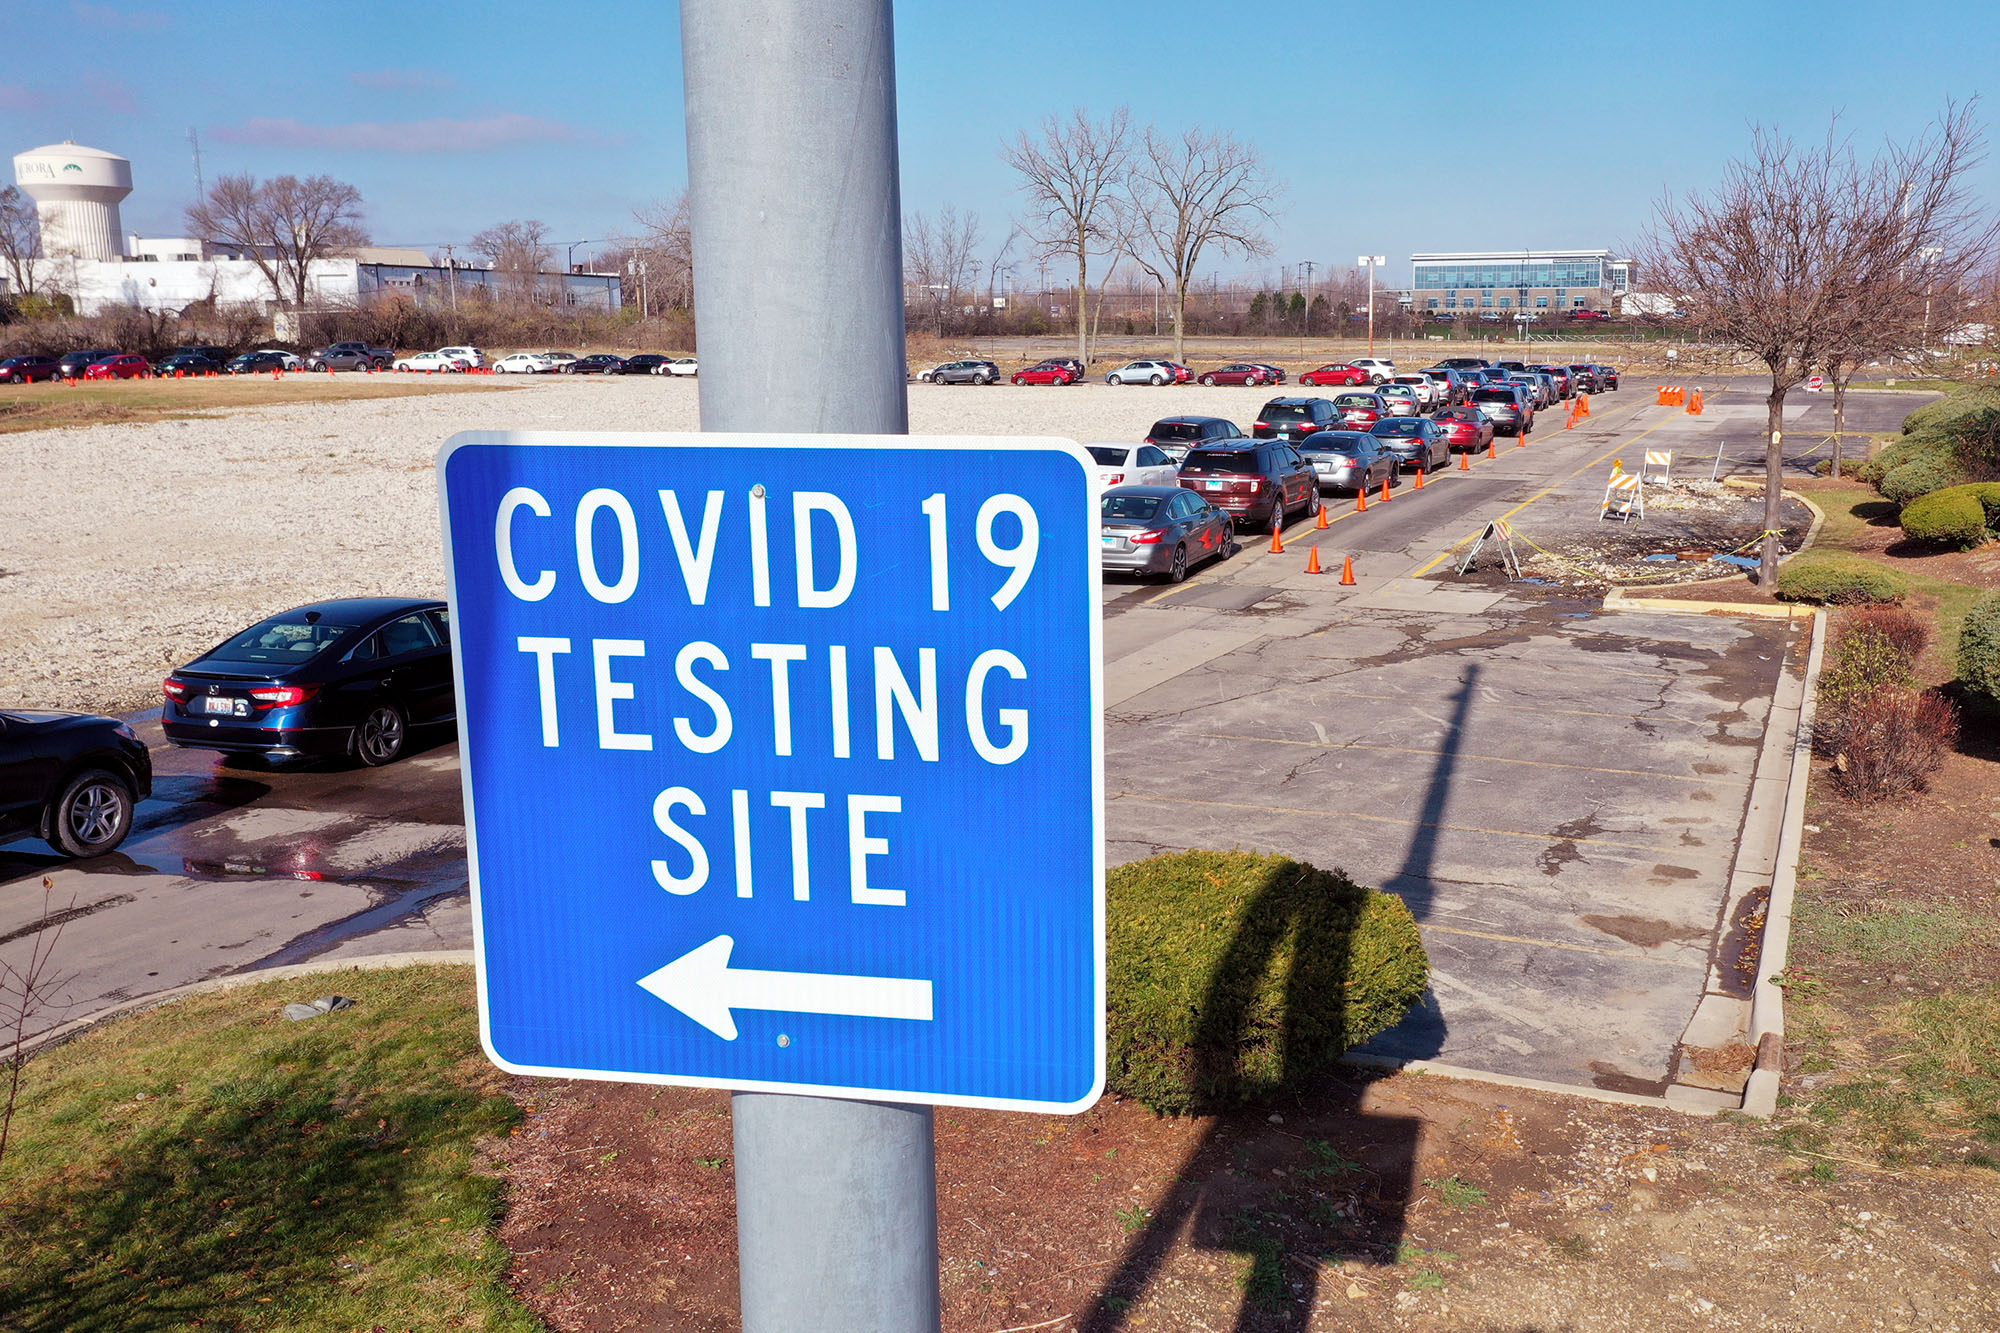 PHOTO: Residents in cars wait in line at a drive-up COVID-19 test site in Aurora, Ill., Nov. 13, 2020.